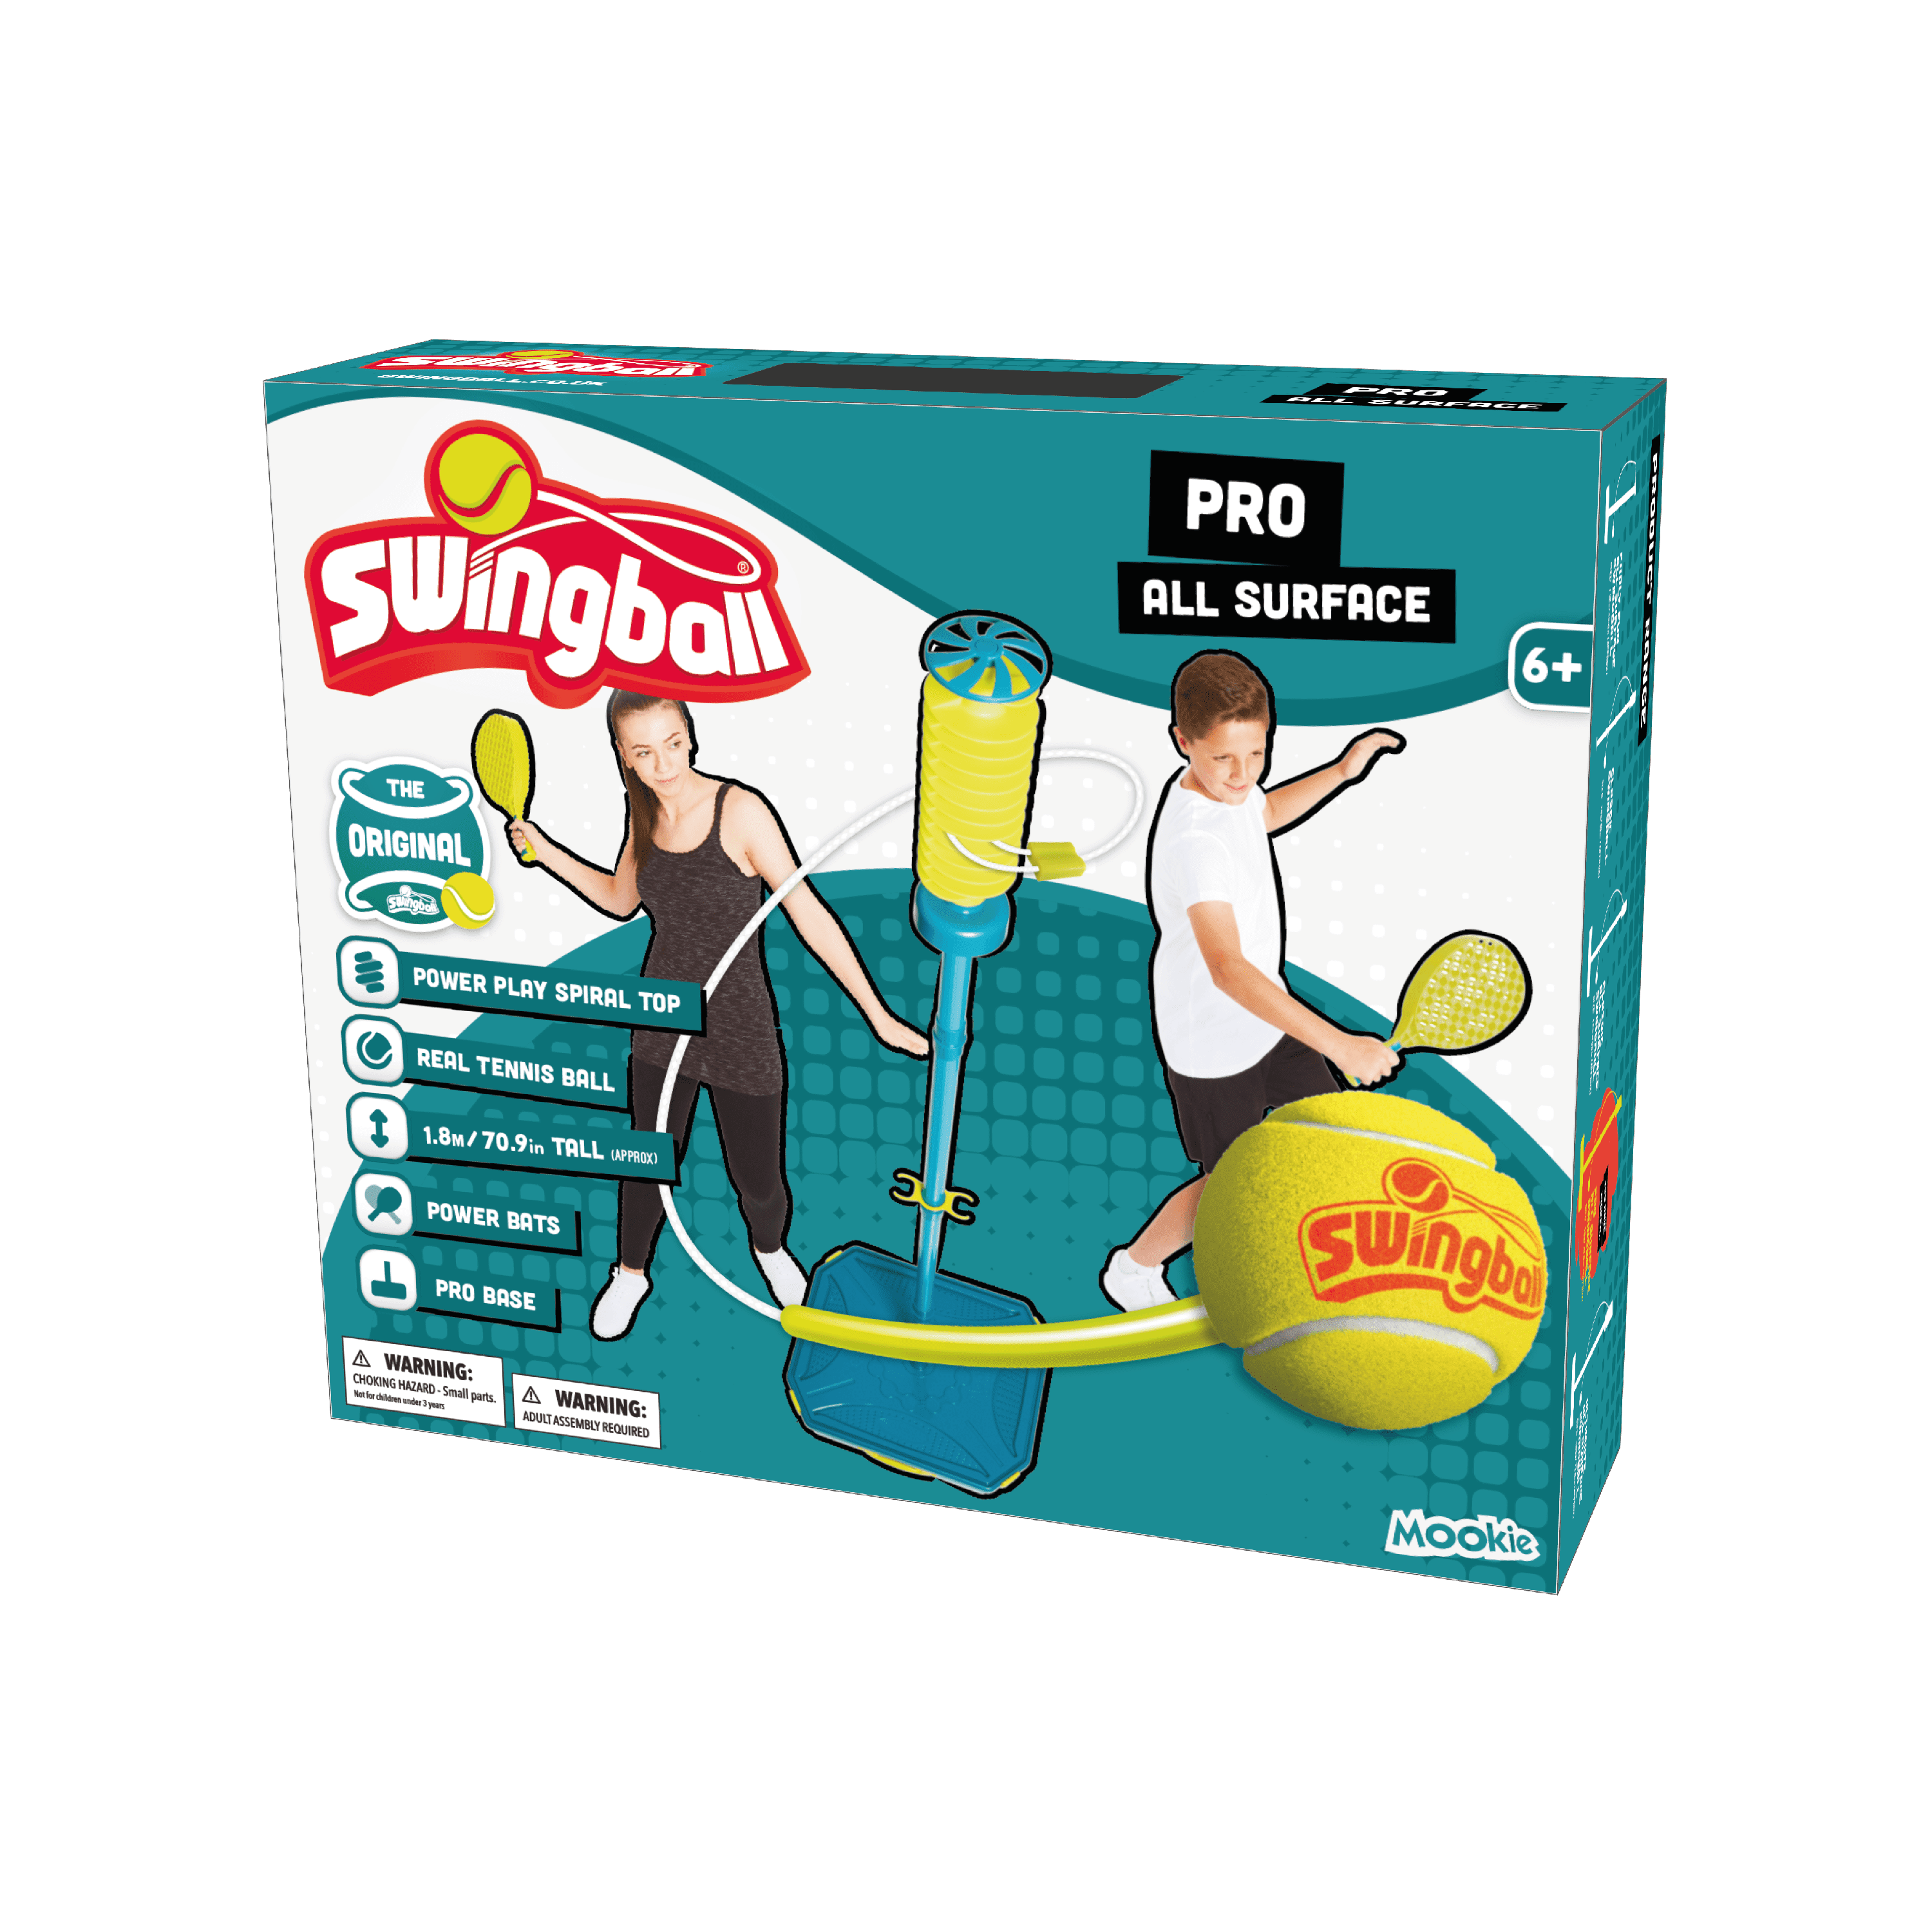 Portable Set Backyard Games Outdoor Goods for sale online Swingball All Surface Pro Tetherball 